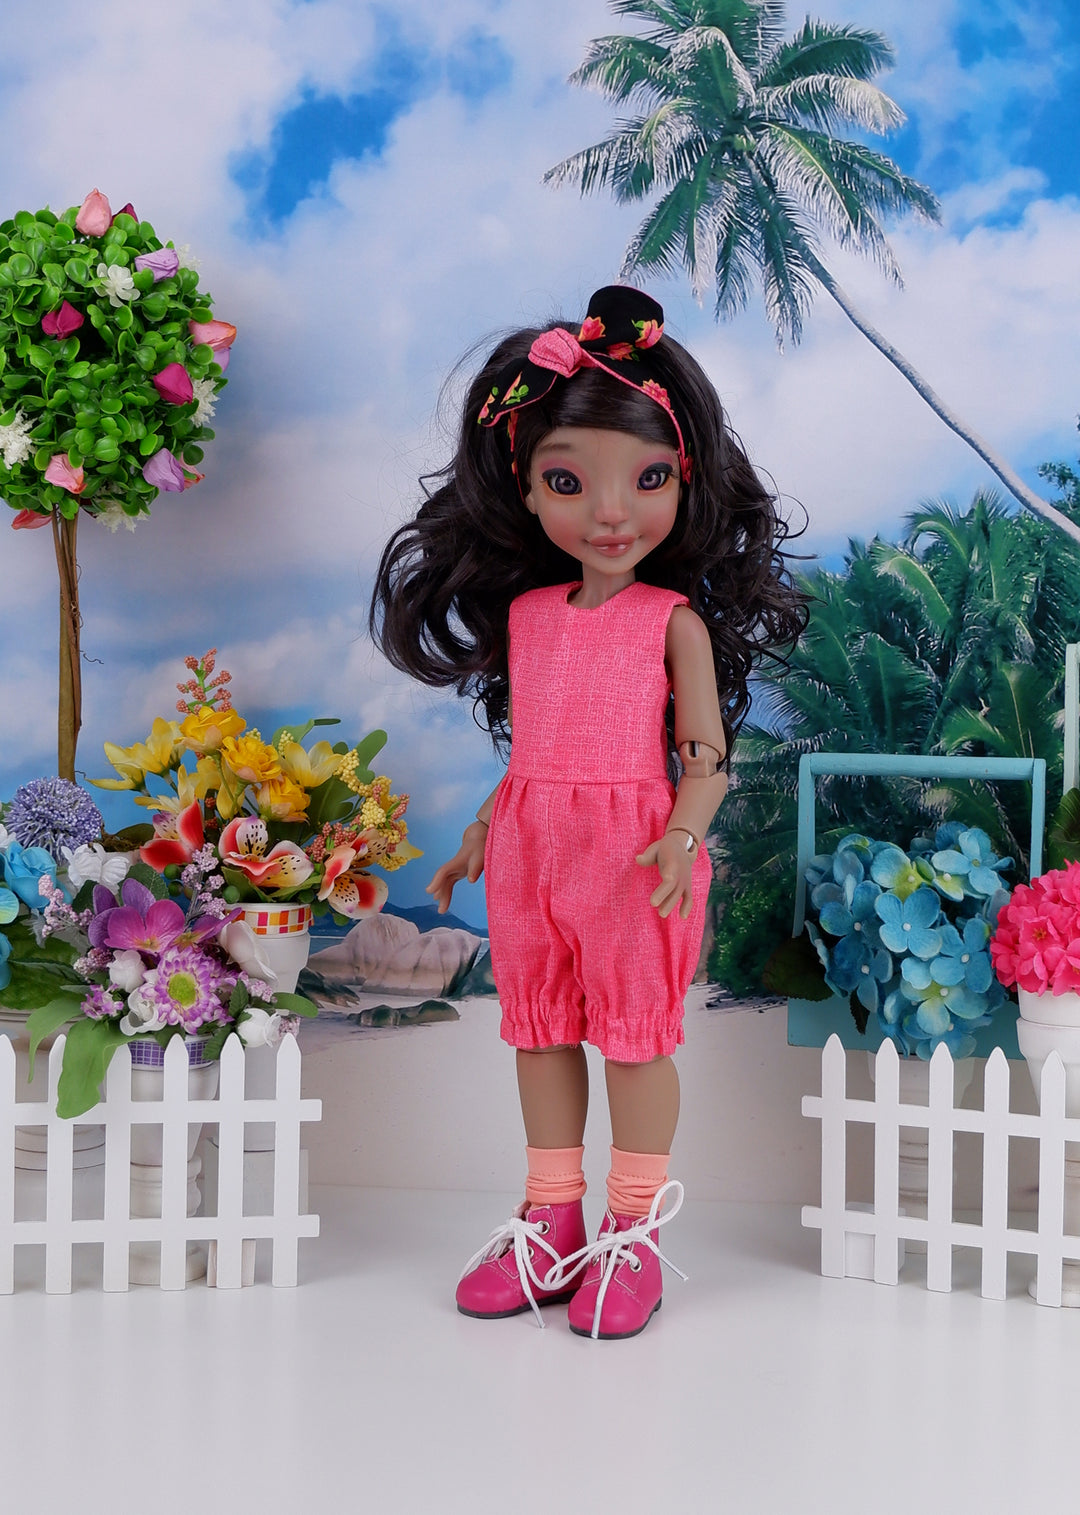 Vibrant Rose - romper and pinafore with boots for Ava doll